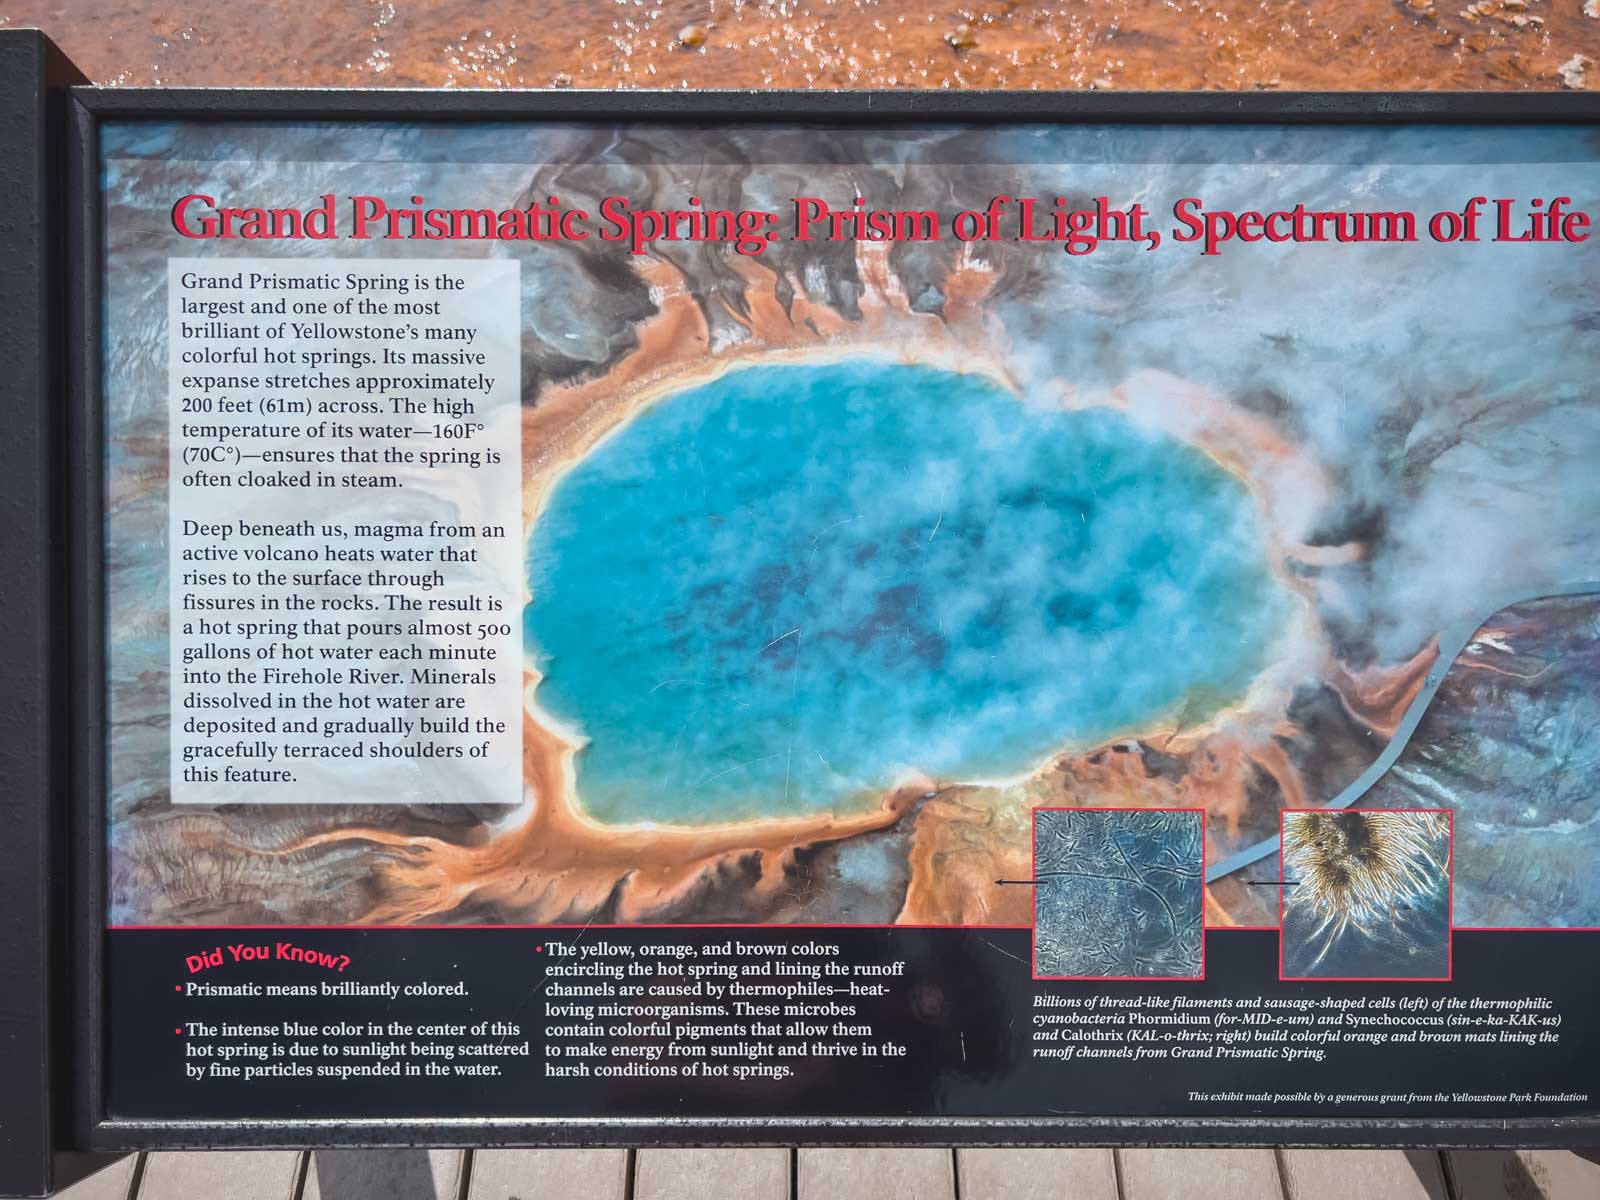 How to visit Grand Prismatic Spring Cause of Colour